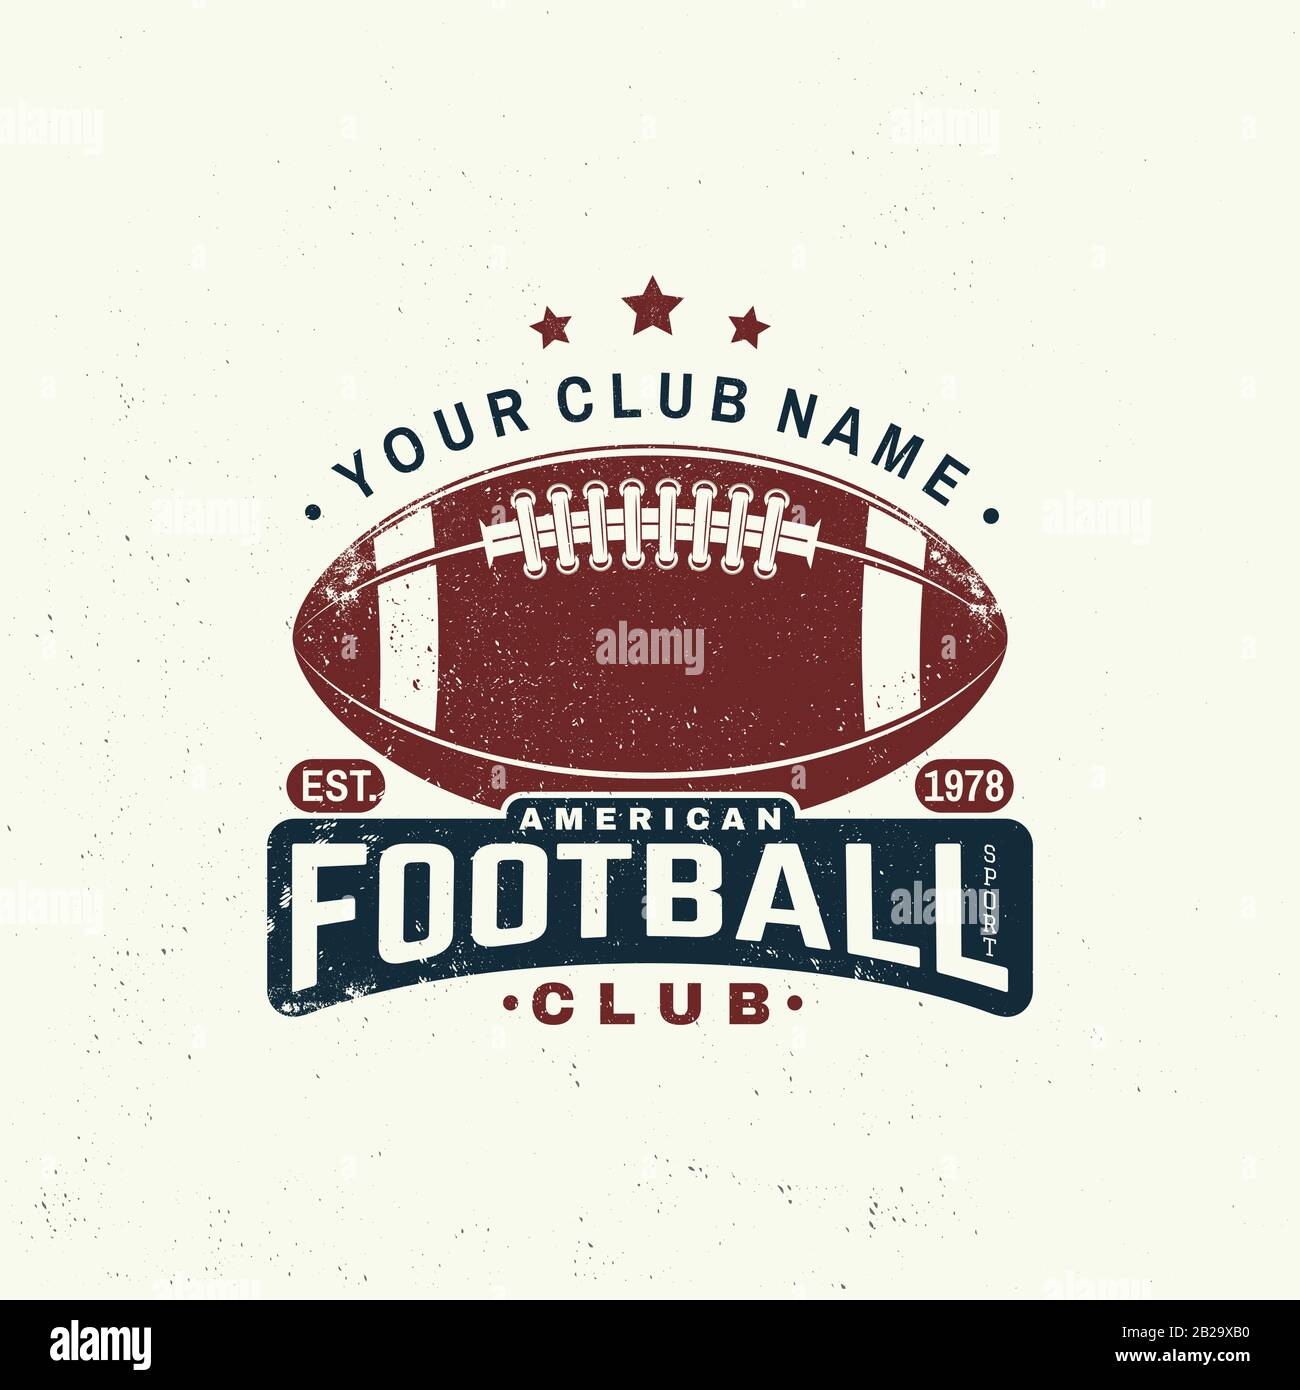 American football or rugby club badge. Vector illustration. Concept for shirt, logo, print, stamp, tee, patch. Vintage typography design with american football ball silhouette Stock Vector